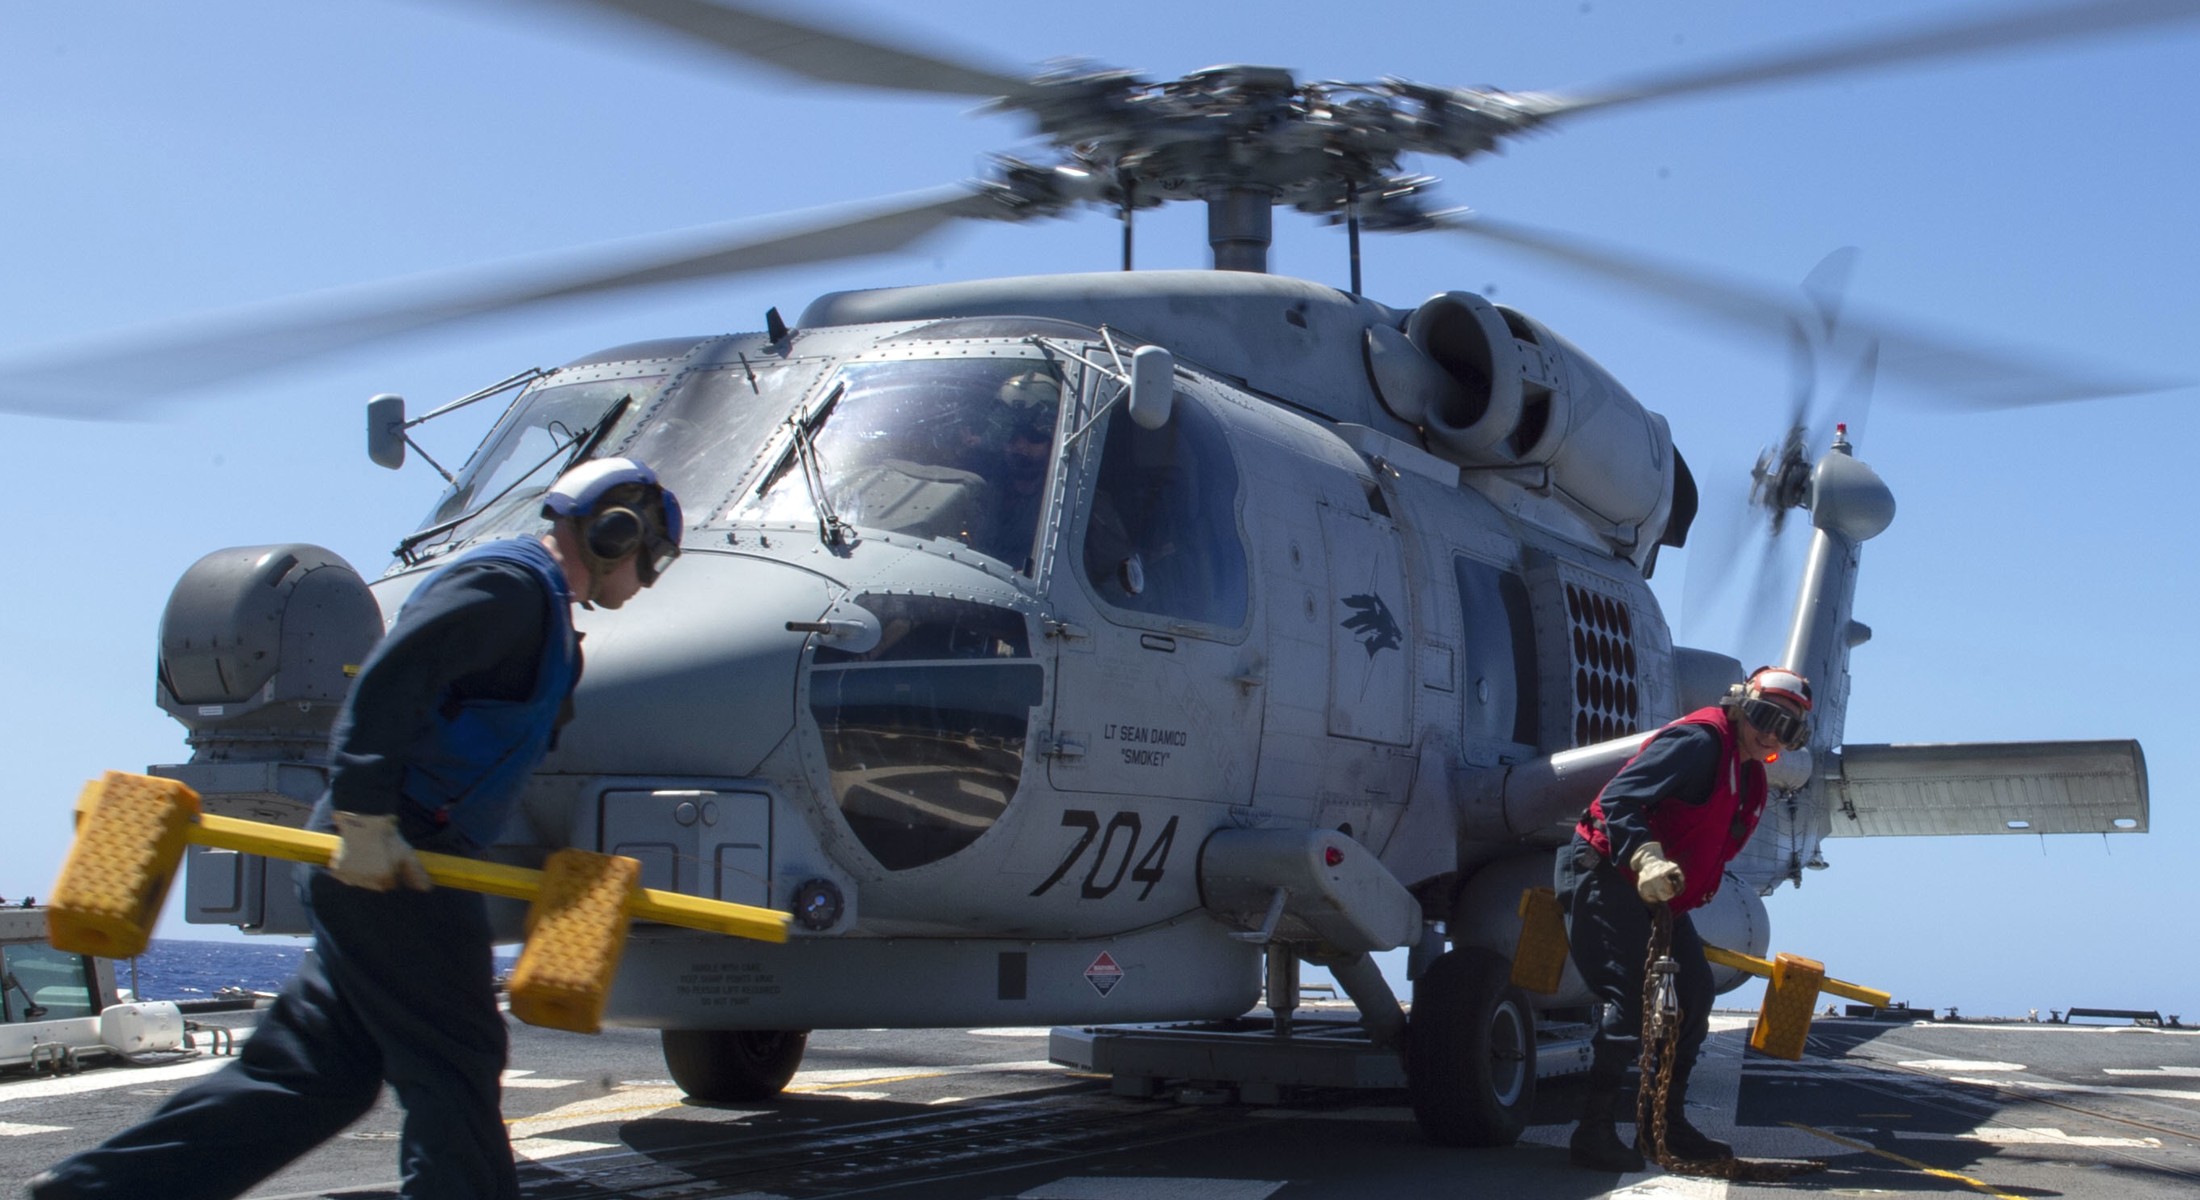 hsm-75 wolfpack helicopter maritime strike squadron us navy mh-60r seahawk 2013 71